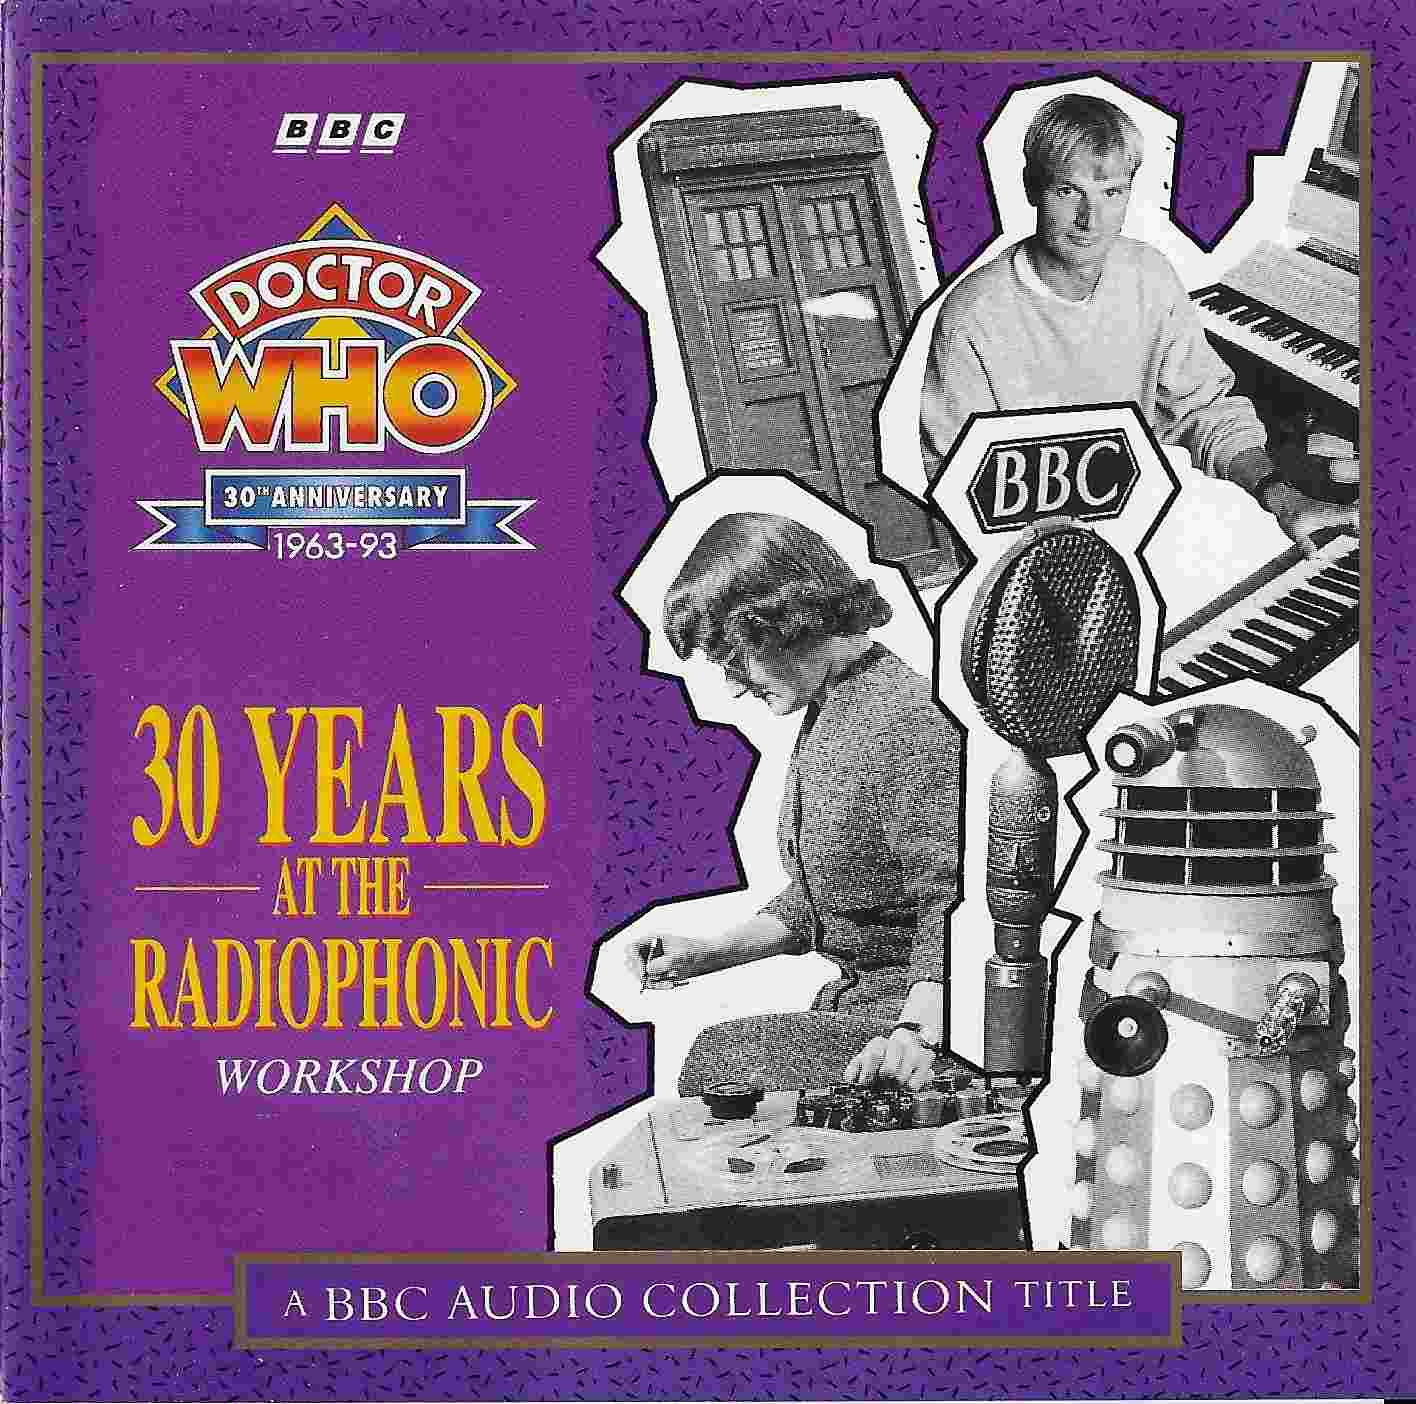 Picture of BBCCD871 Doctor Who - 30 years at the BBC radiophonic workshop by artist Various from the BBC cds - Records and Tapes library